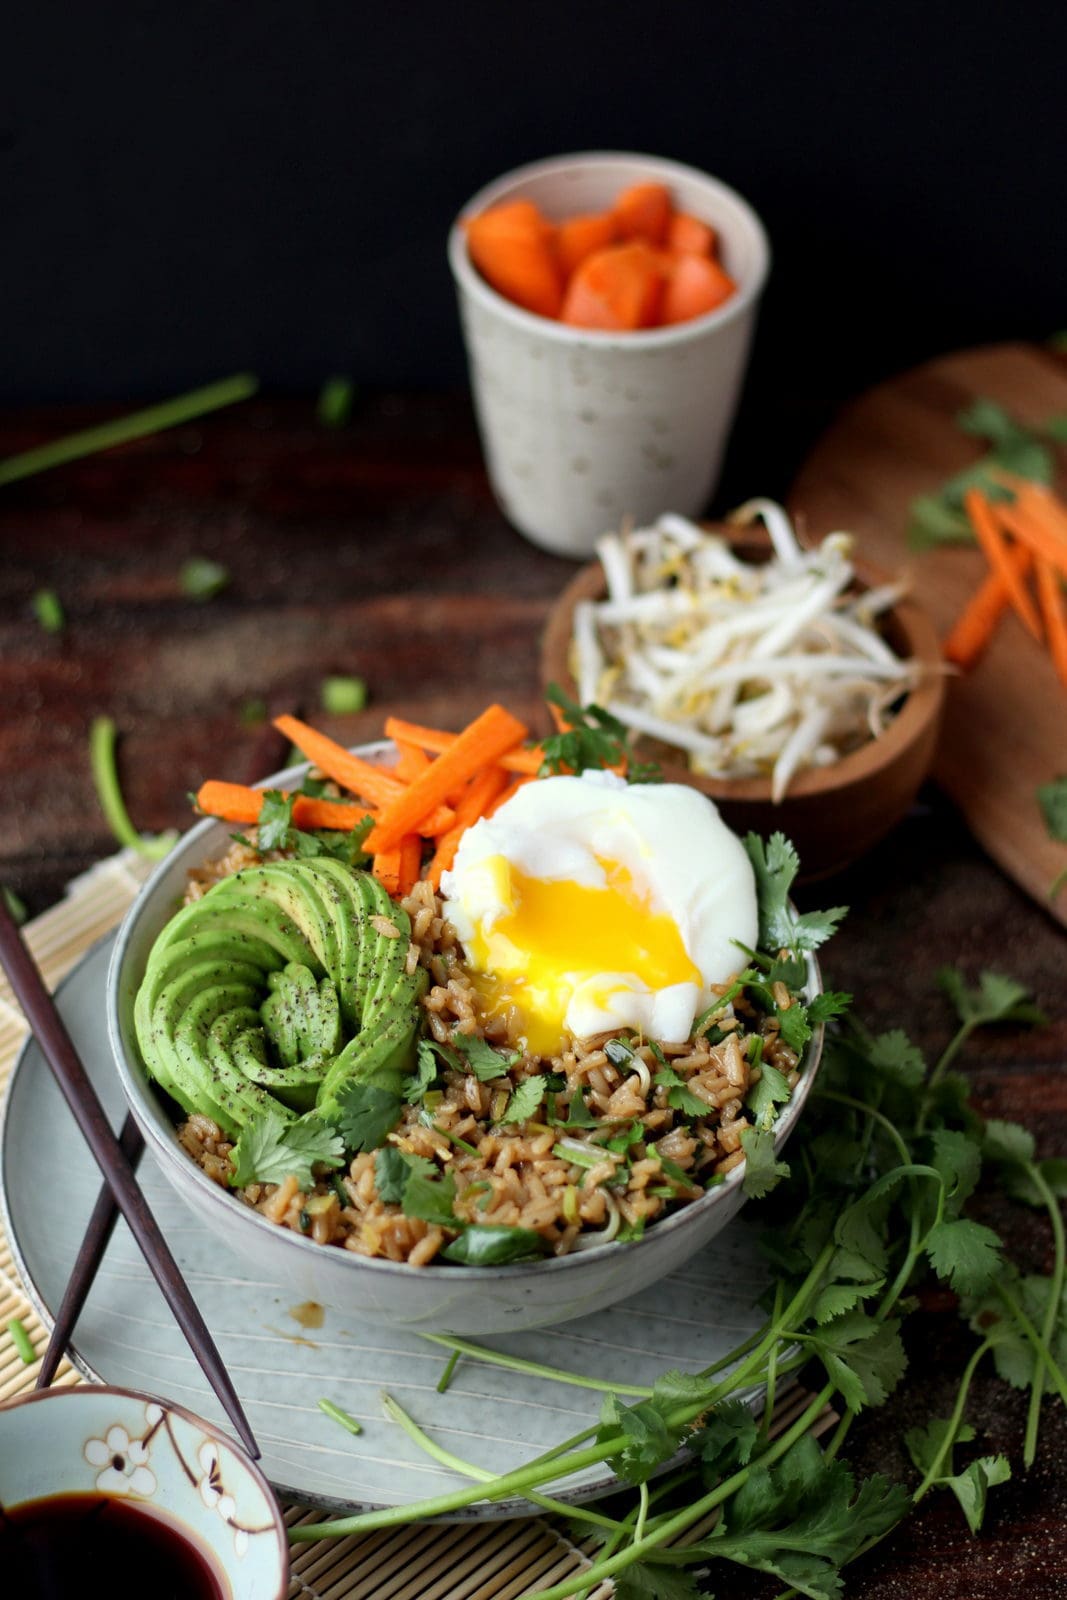 Cilantro Fried Rice + Avocado and Poached Egg - awesome vegetarian rice bowl recipe! thewoodenskillet.com #ricebowl #foodphotography